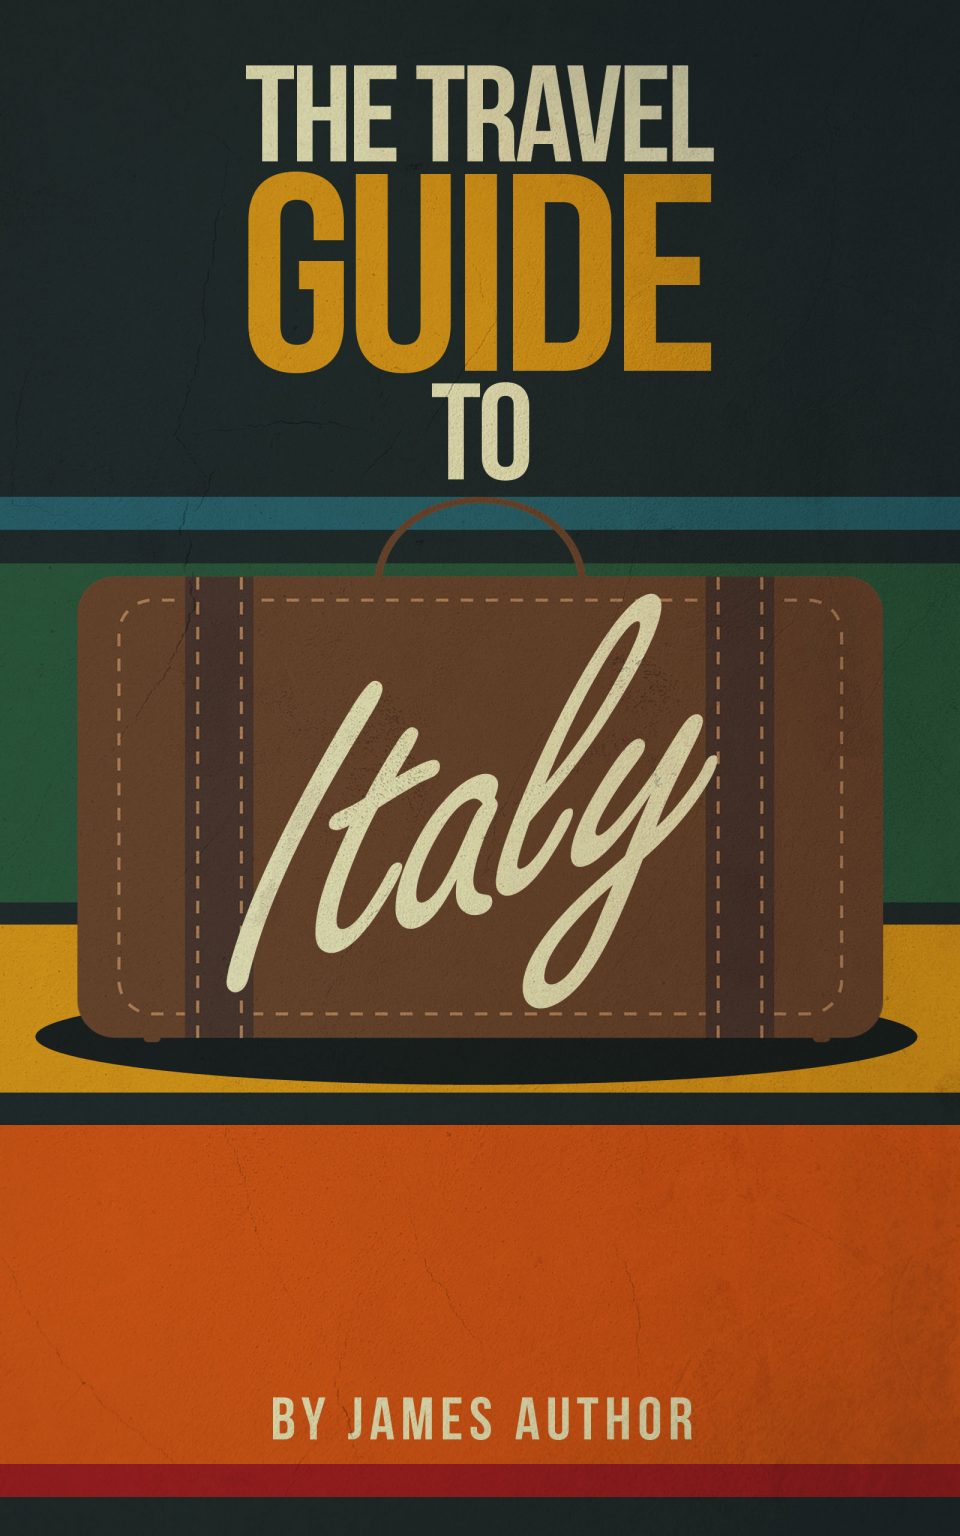 Travel Guide eBook Cover Template